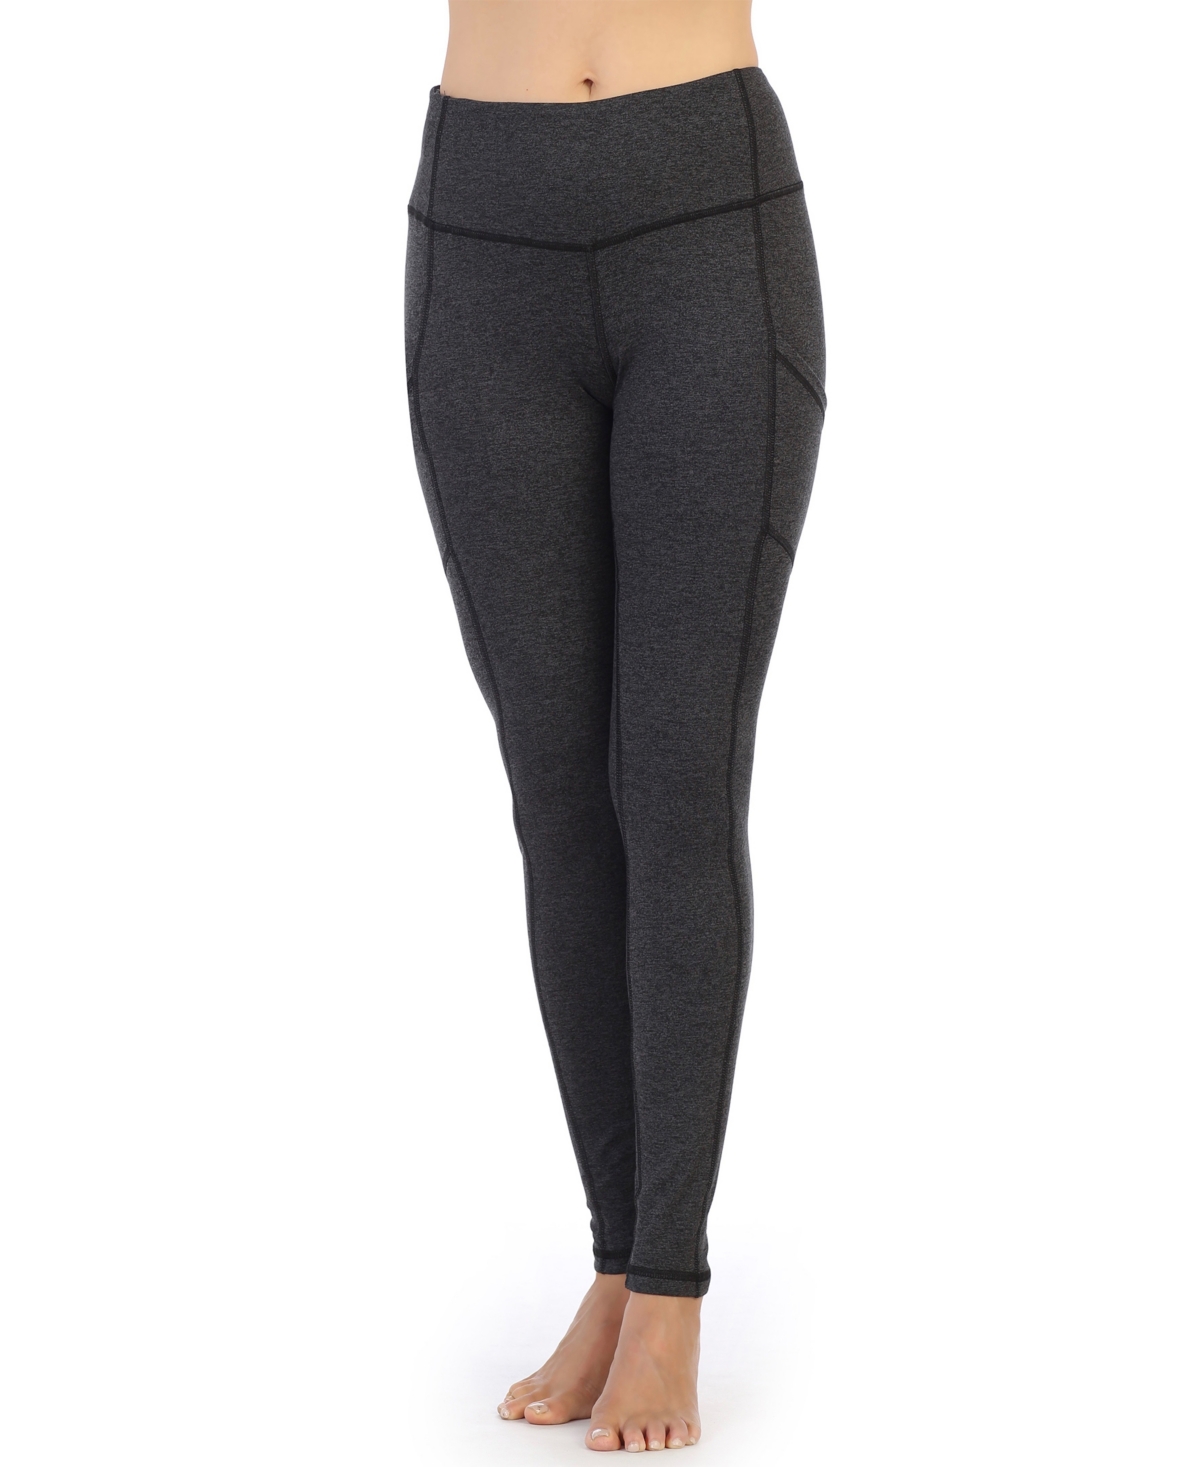  American Fitness Couture High Waist Full Length Pocket Compression Leggings